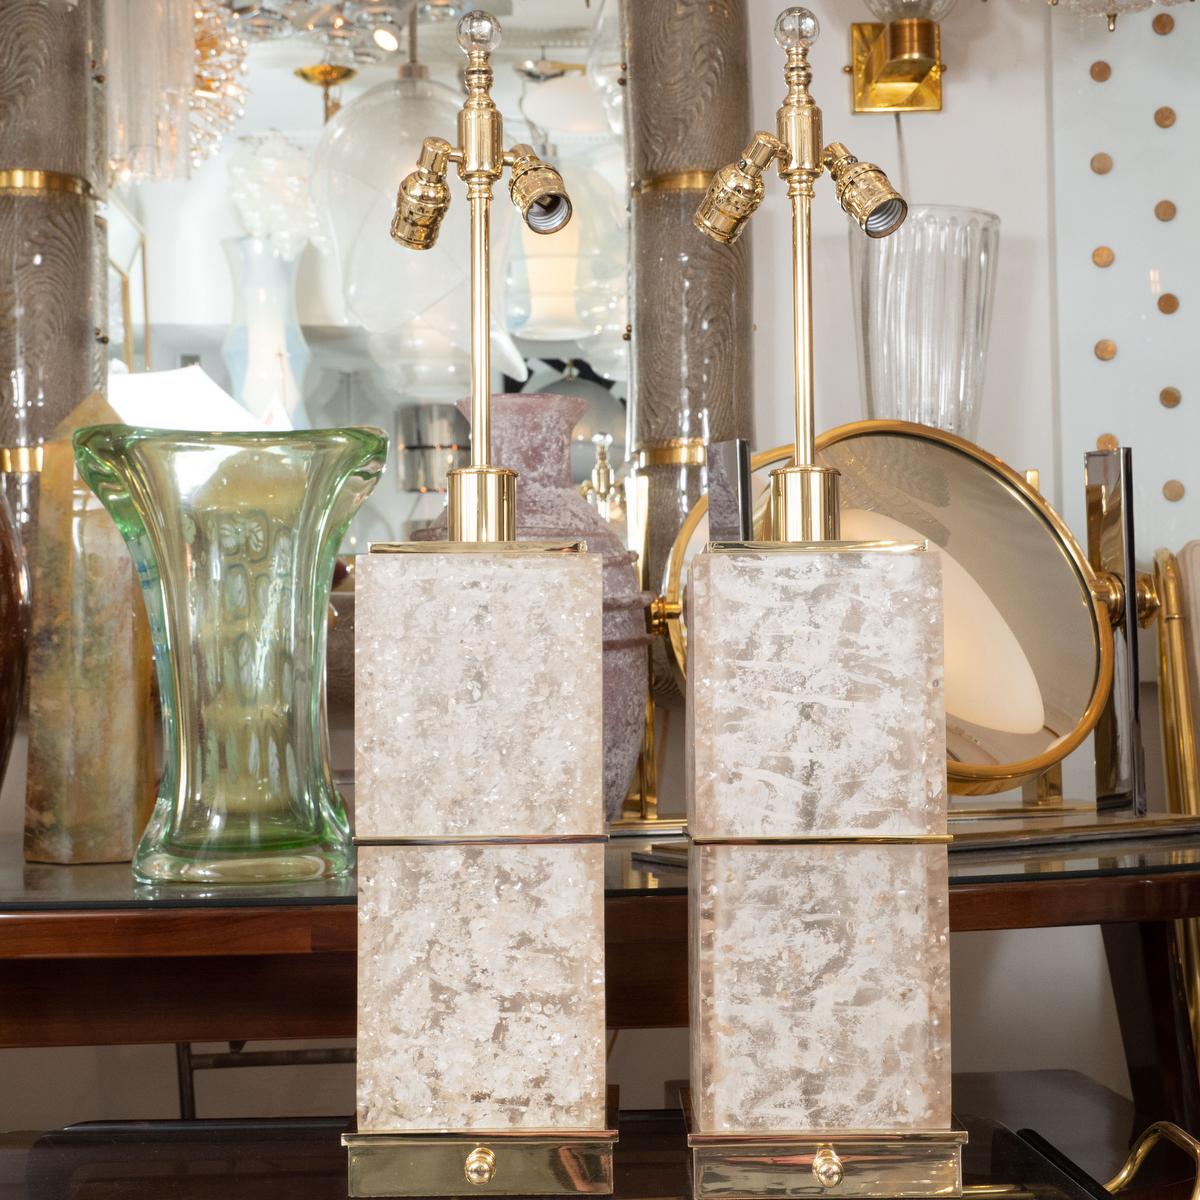 Pair of fractured resin block table lamps with brass hardware.